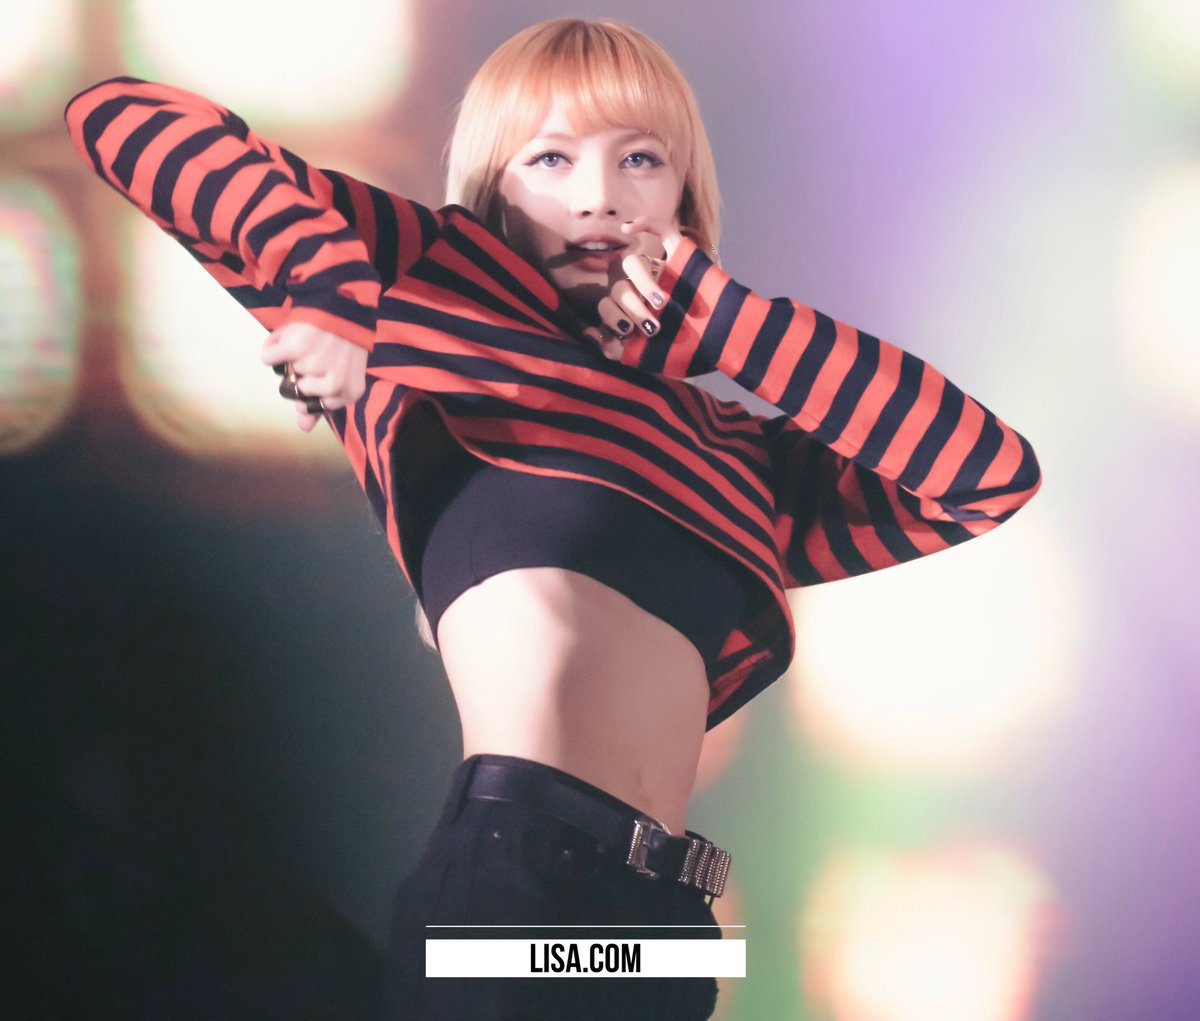 BLACKPINK Lisa reveals her toned abs at latest performance http://aegyo.me/...